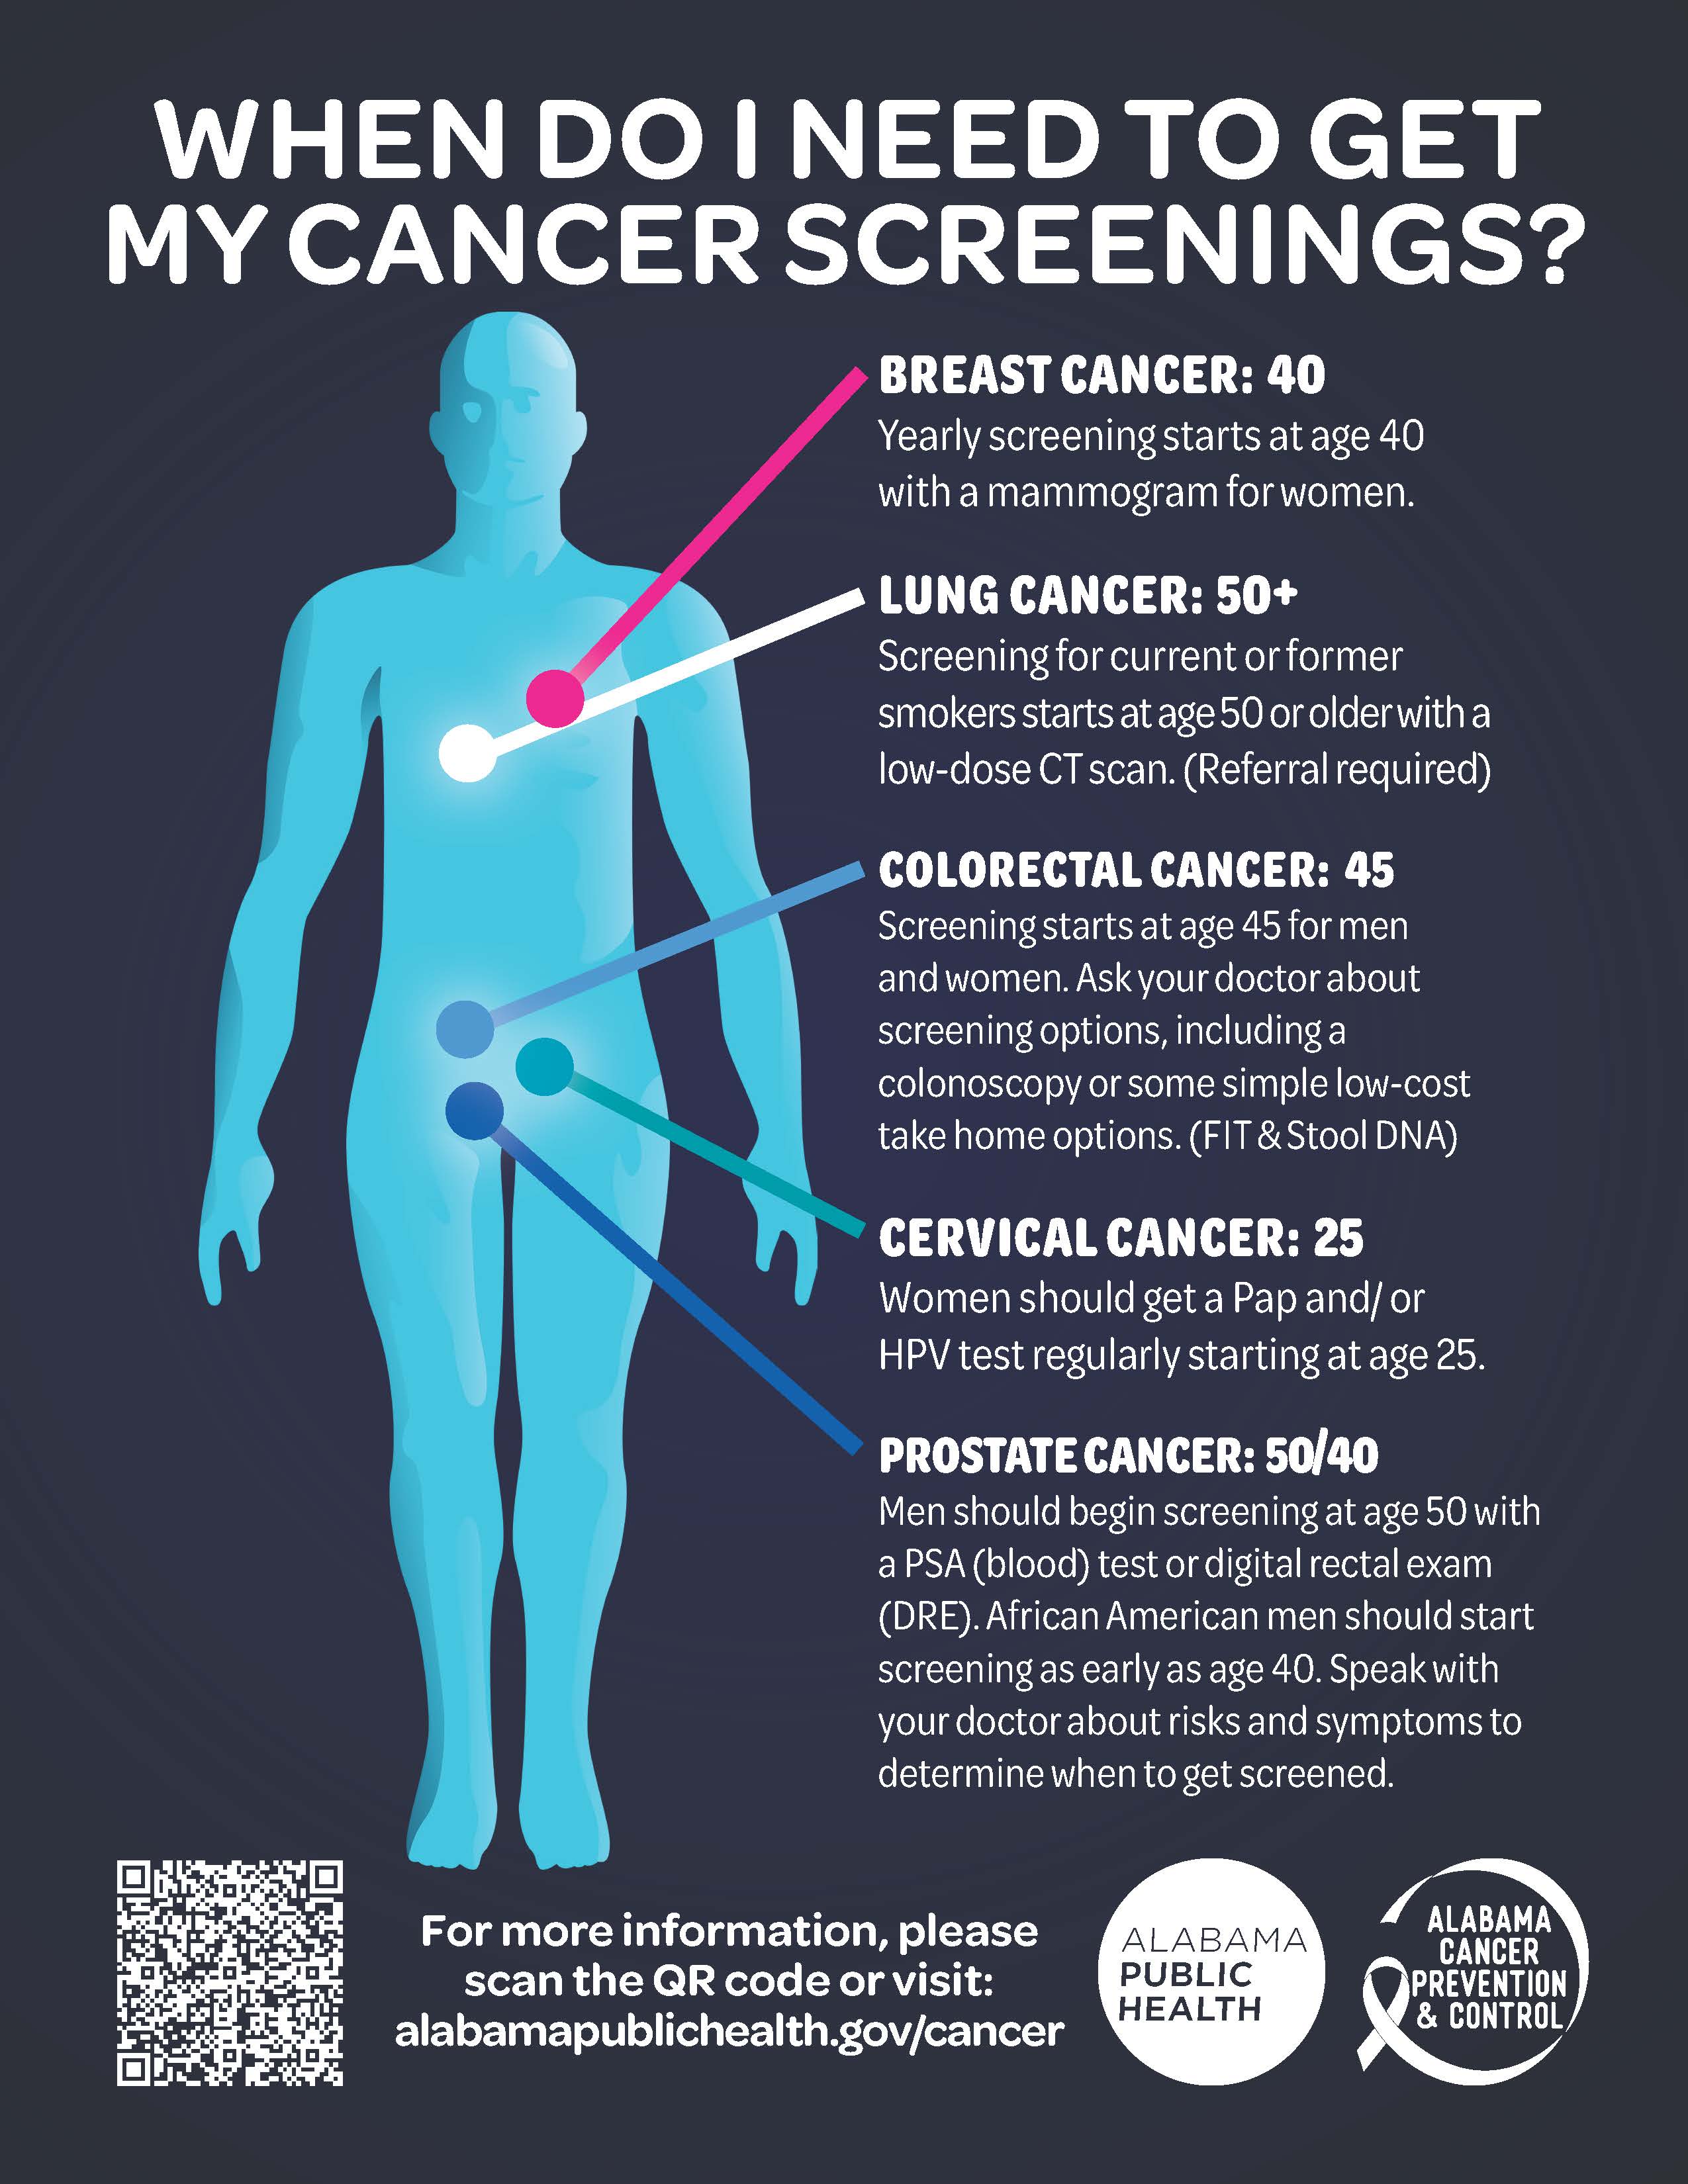 When Do I Need To Get My Cancer Screenings?